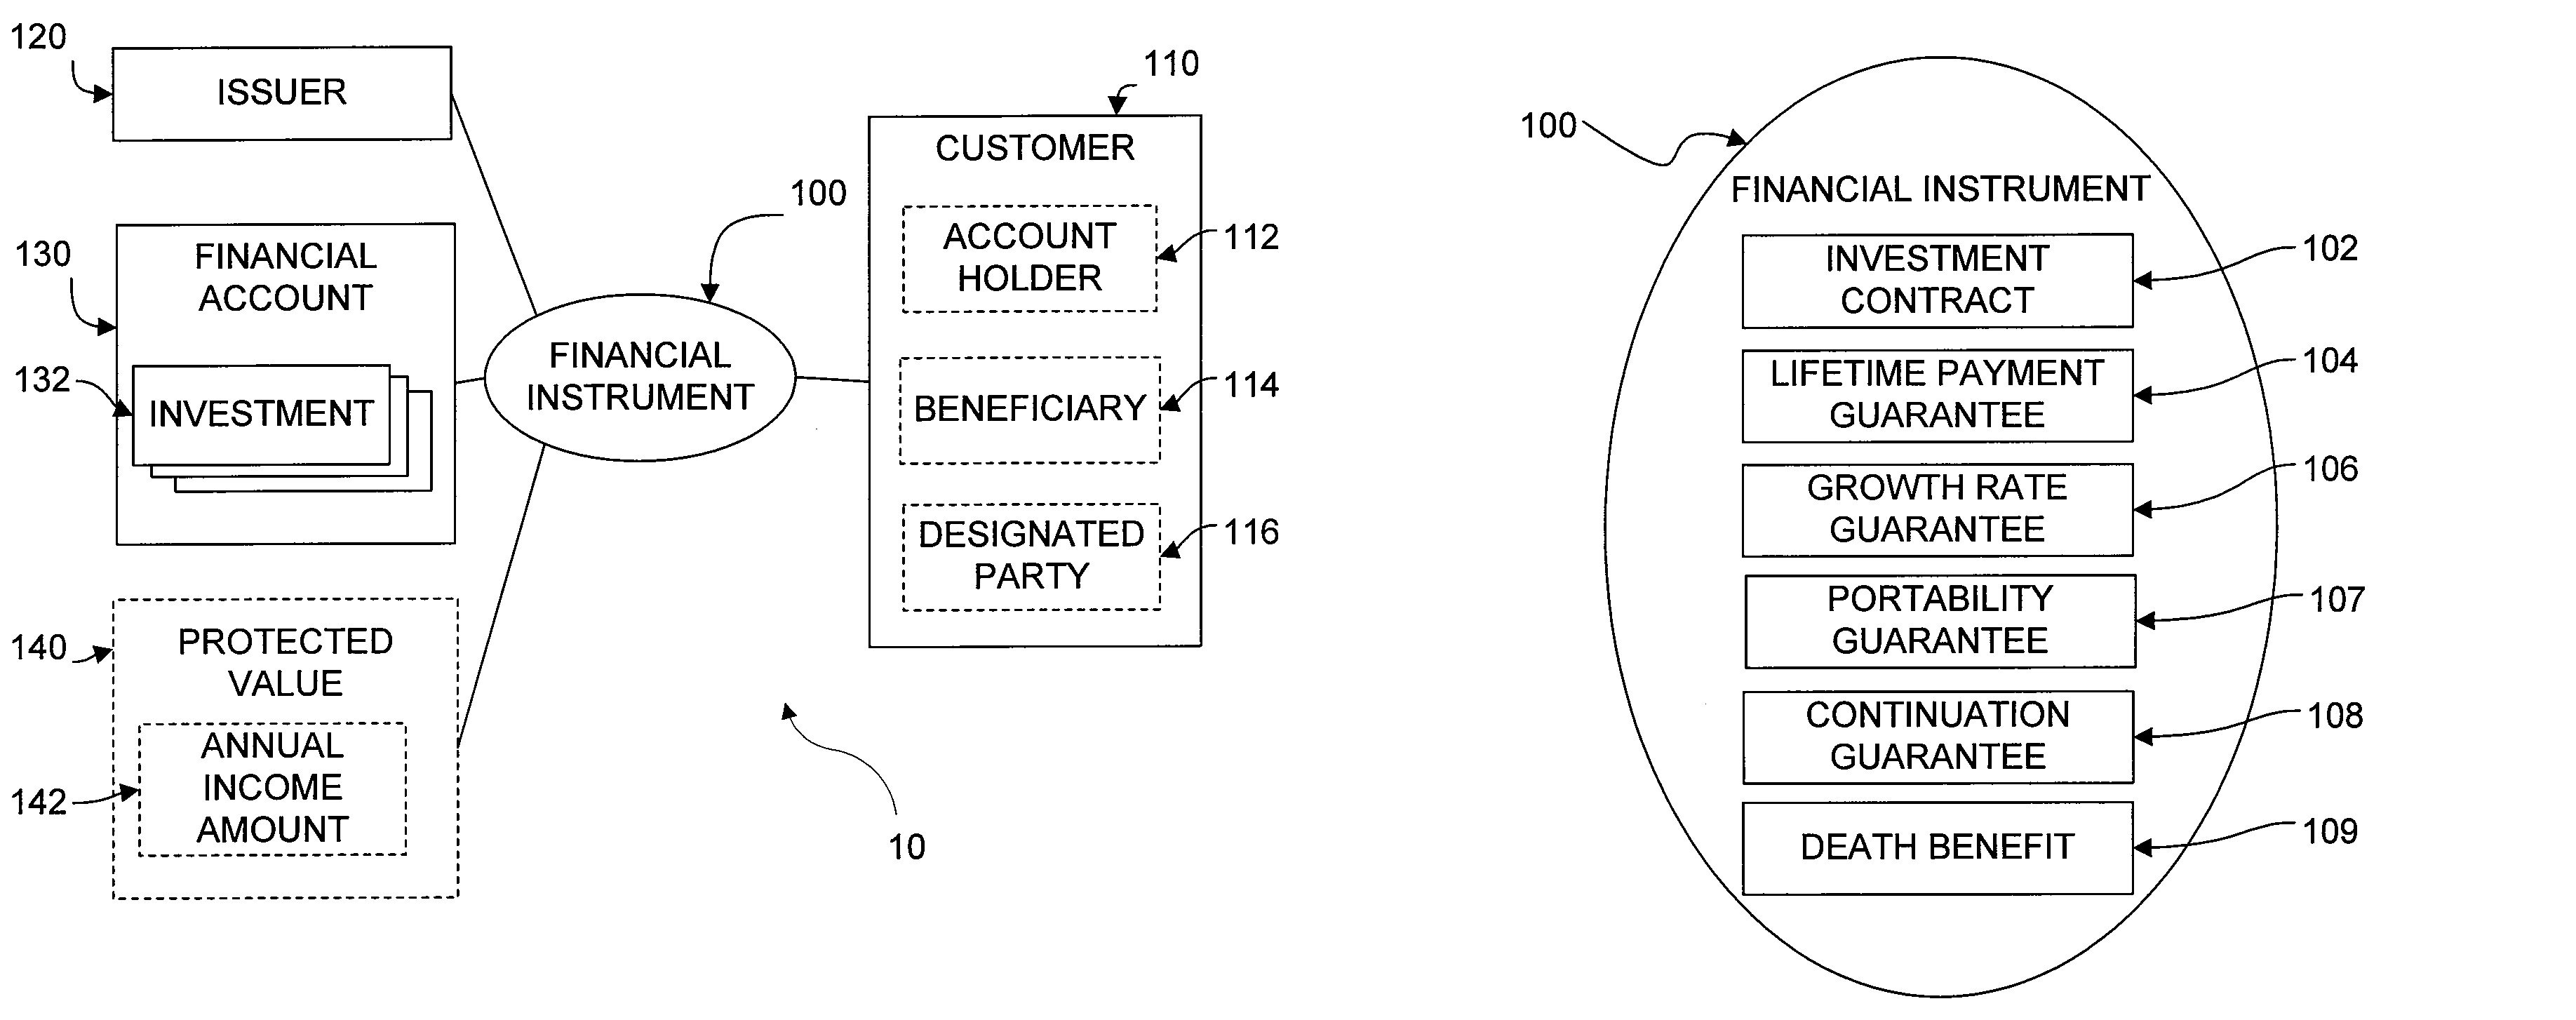 Financial instrument utilizing a customer specific date